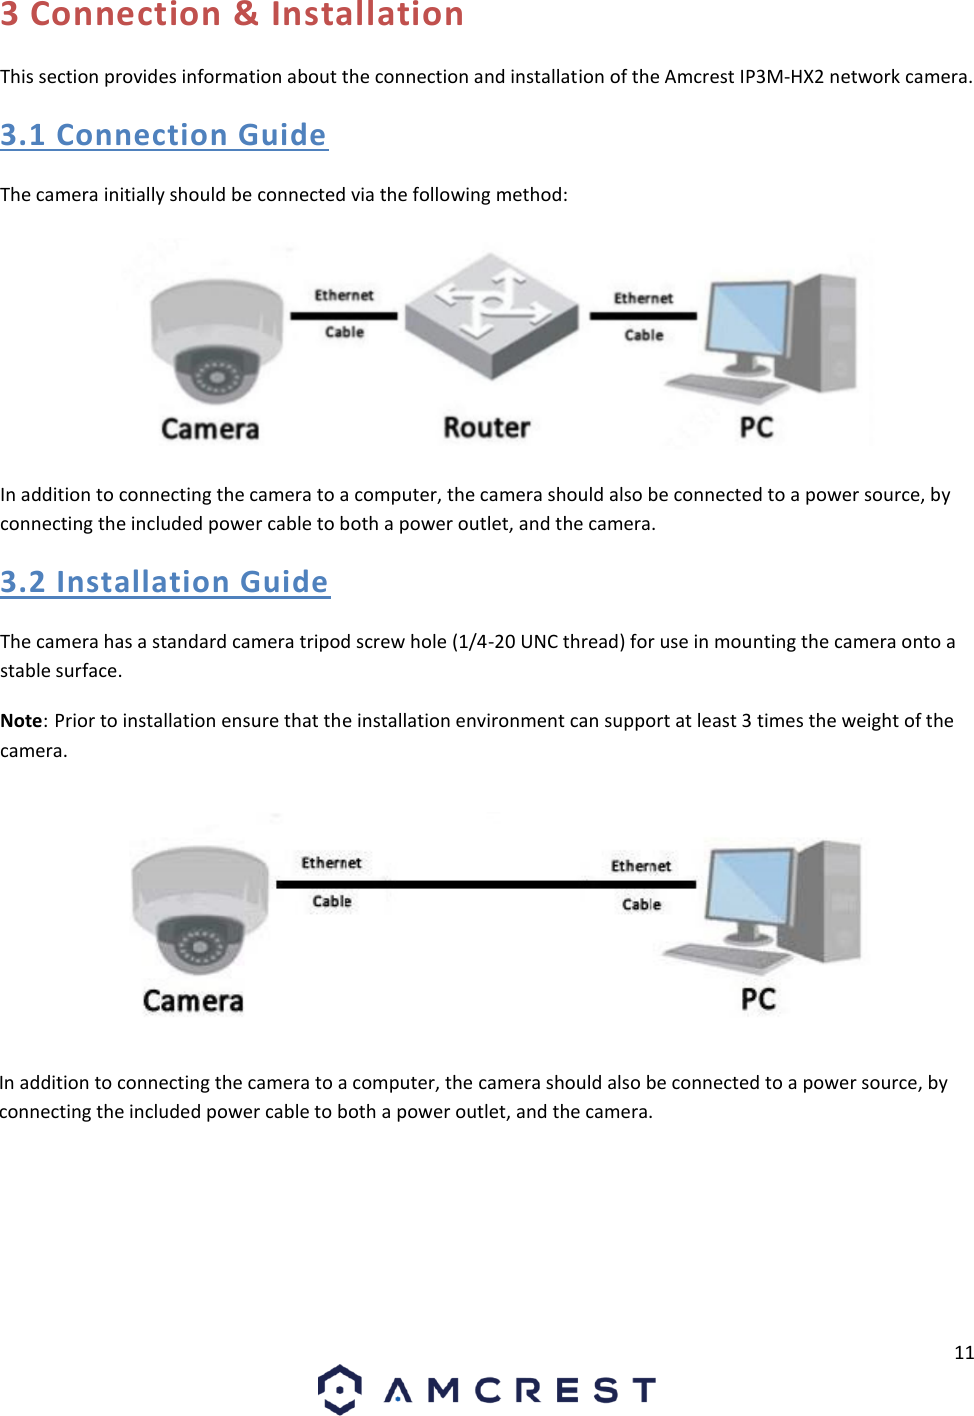 11 3 Connection &amp; Installation This section provides information about the connection and installation of the Amcrest IP3M-HX2 network camera. 3.1 Connection Guide The camera initially should be connected via the following method: In addition to connecting the camera to a computer, the camera should also be connected to a power source, by connecting the included power cable to both a power outlet, and the camera. 3.2 Installation Guide The camera has a standard camera tripod screw hole (1/4-20 UNC thread) for use in mounting the camera onto a stable surface.  Note: Prior to installation ensure that the installation environment can support at least 3 times the weight of the camera. In addition to connecting the camera to a computer, the camera should also be connected to a power source, by connecting the included power cable to both a power outlet, and the camera.